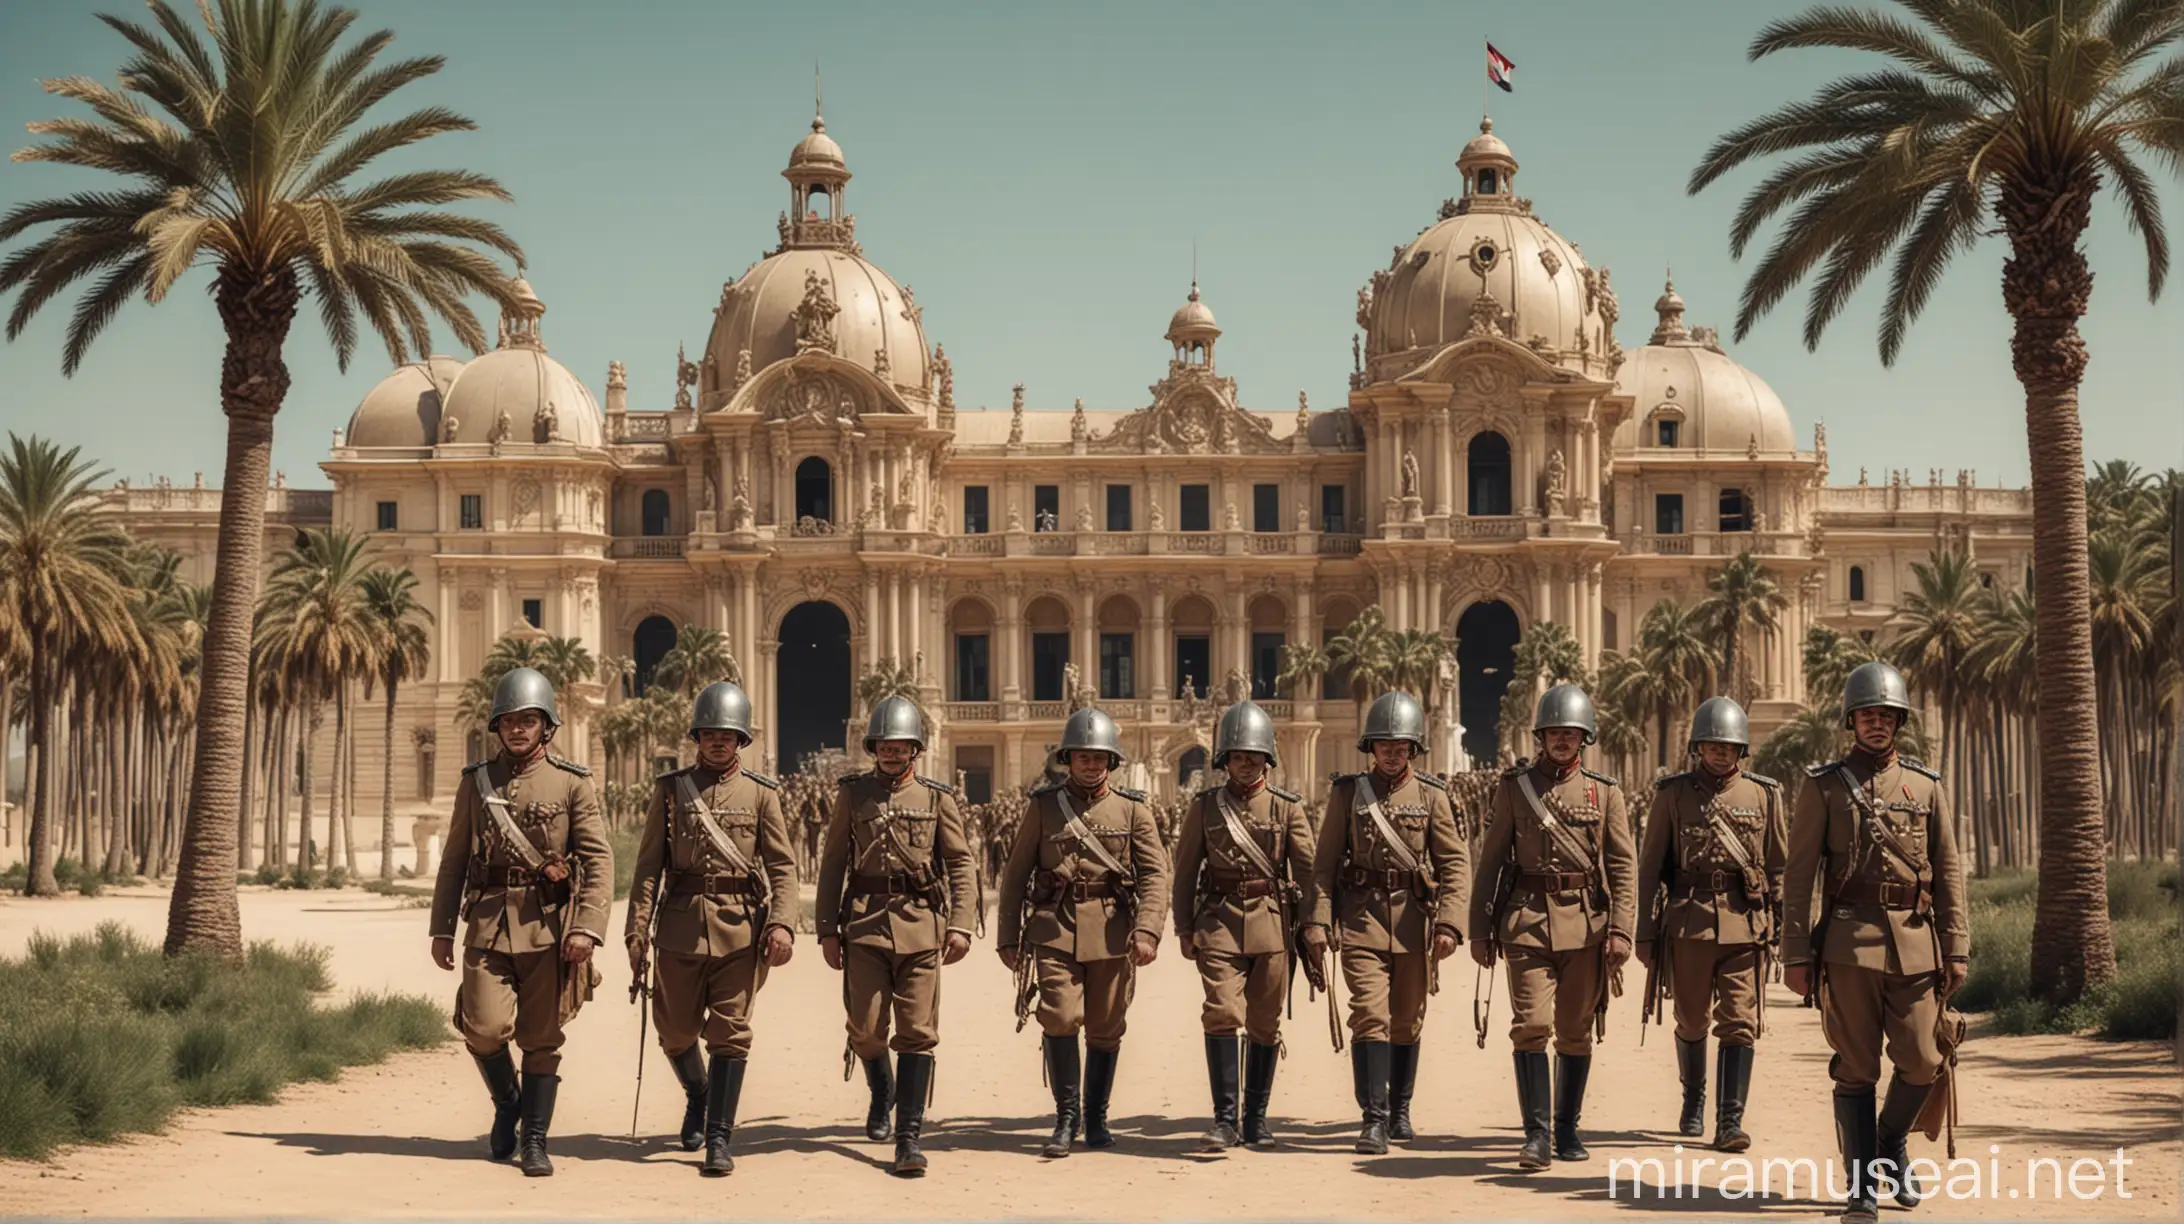 Nazi Steampunk german colonial soldiers wearing helmets on their heads, marching on a french baroque palace in a desert with palm trees